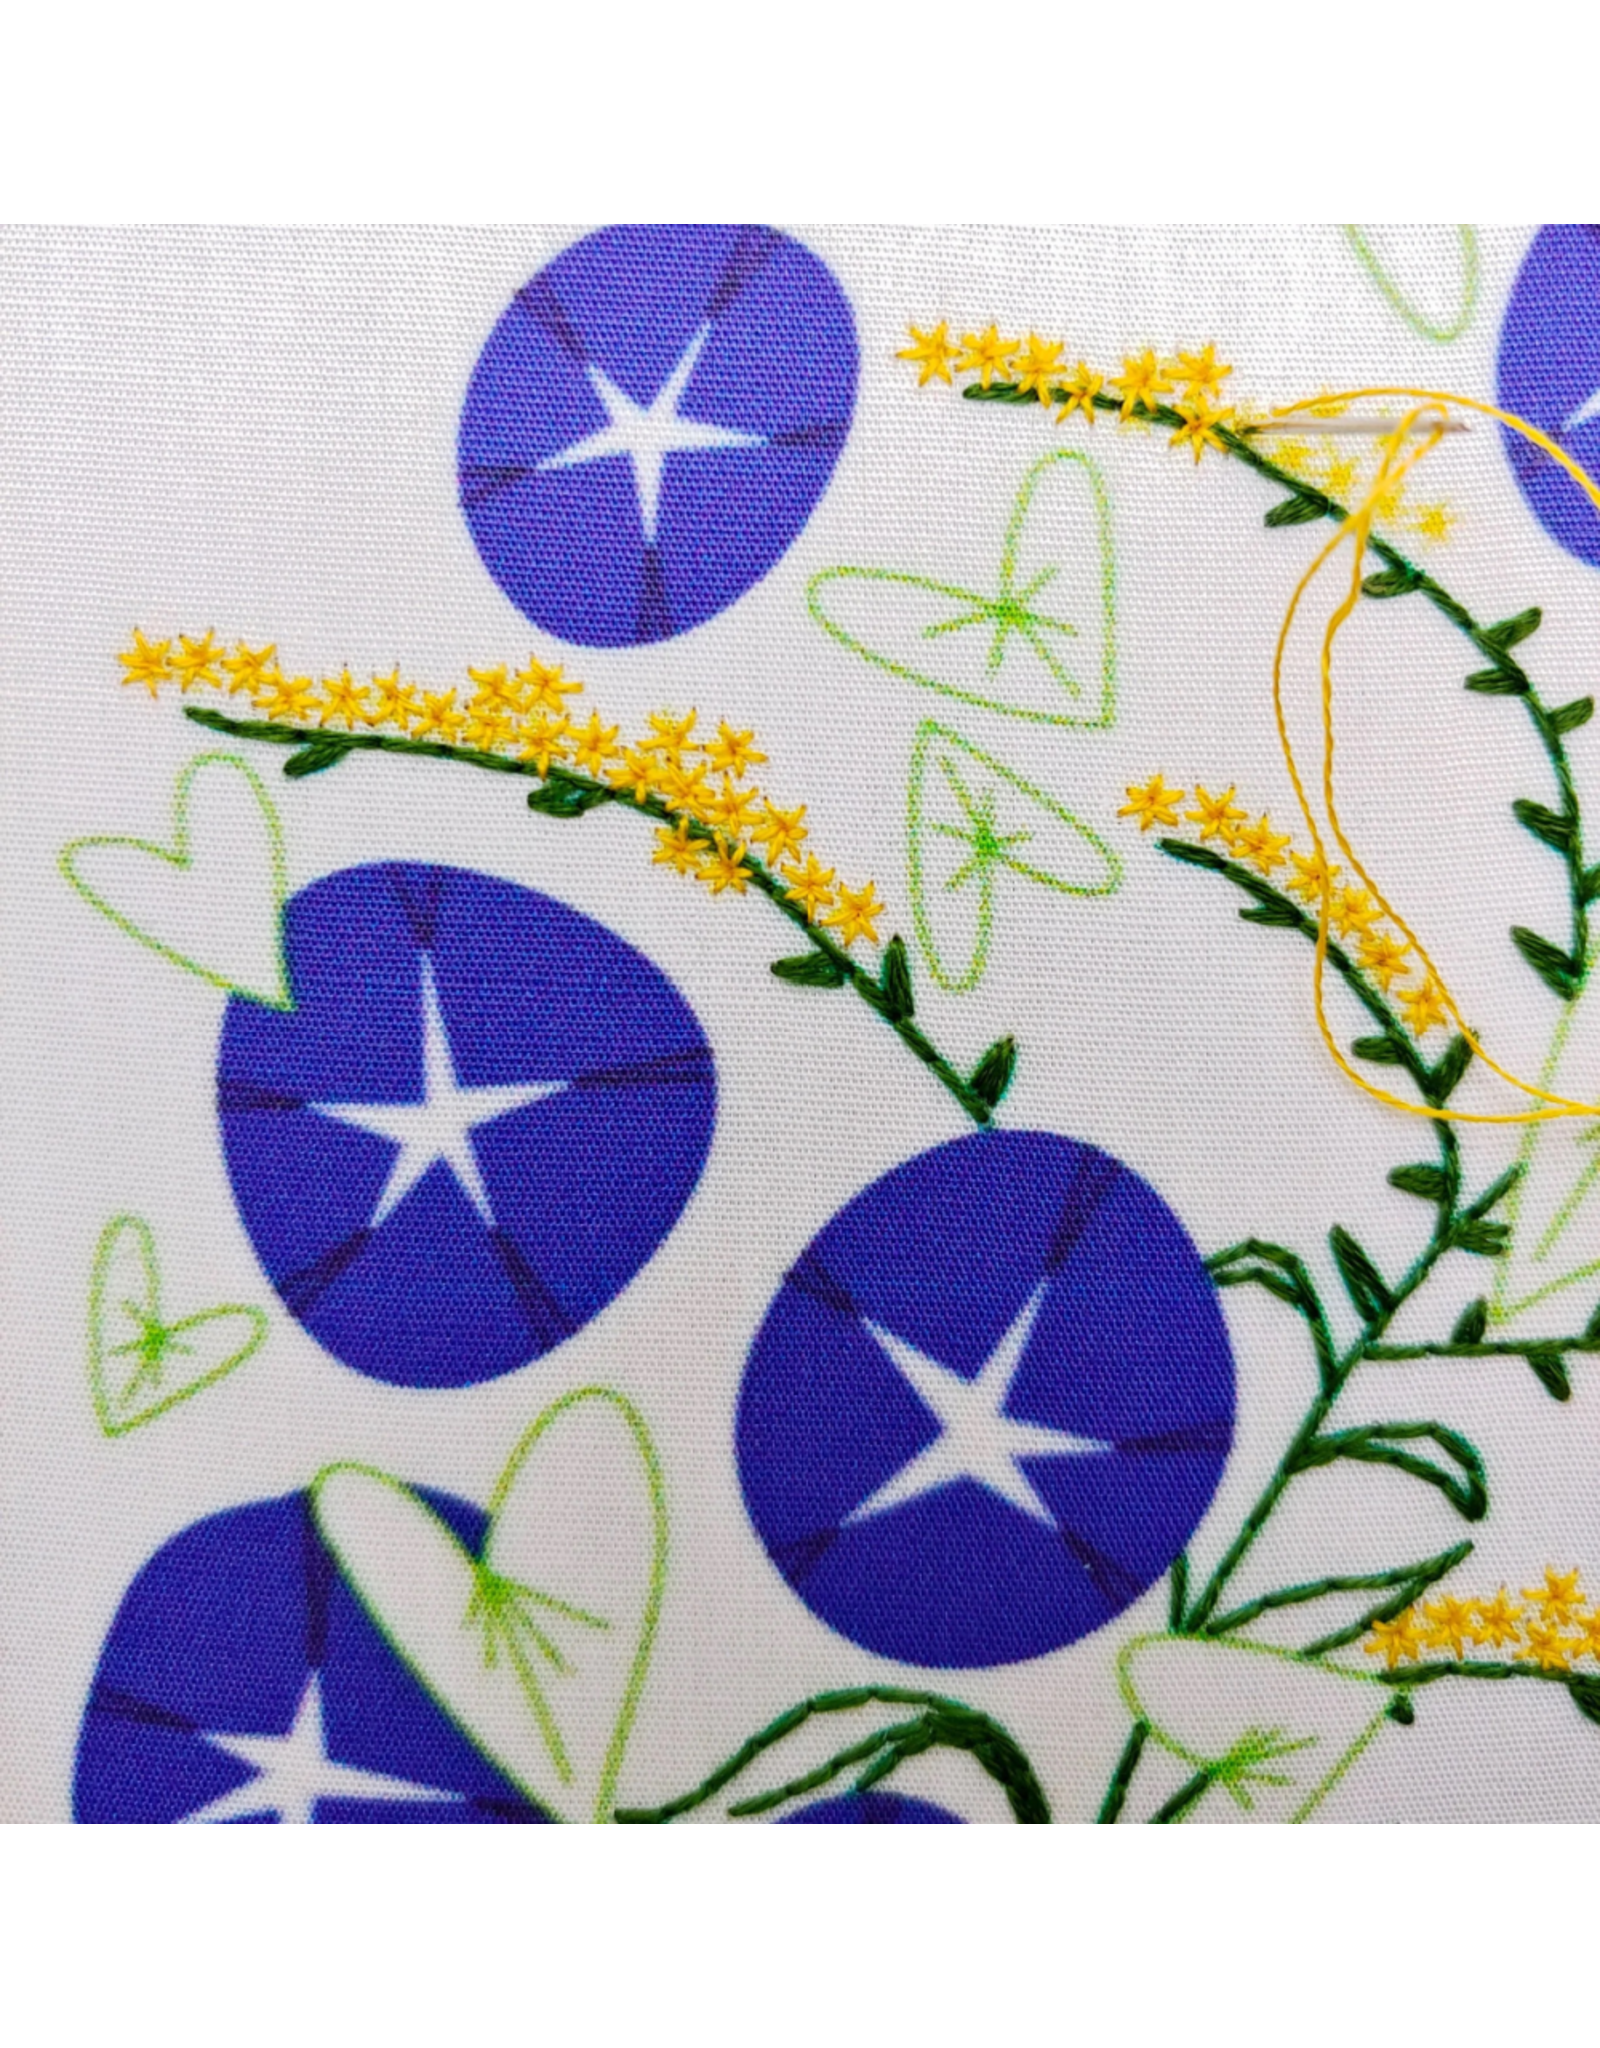 cozyblue *NEW* Morning Glory Embroidery Kit from cozyblue